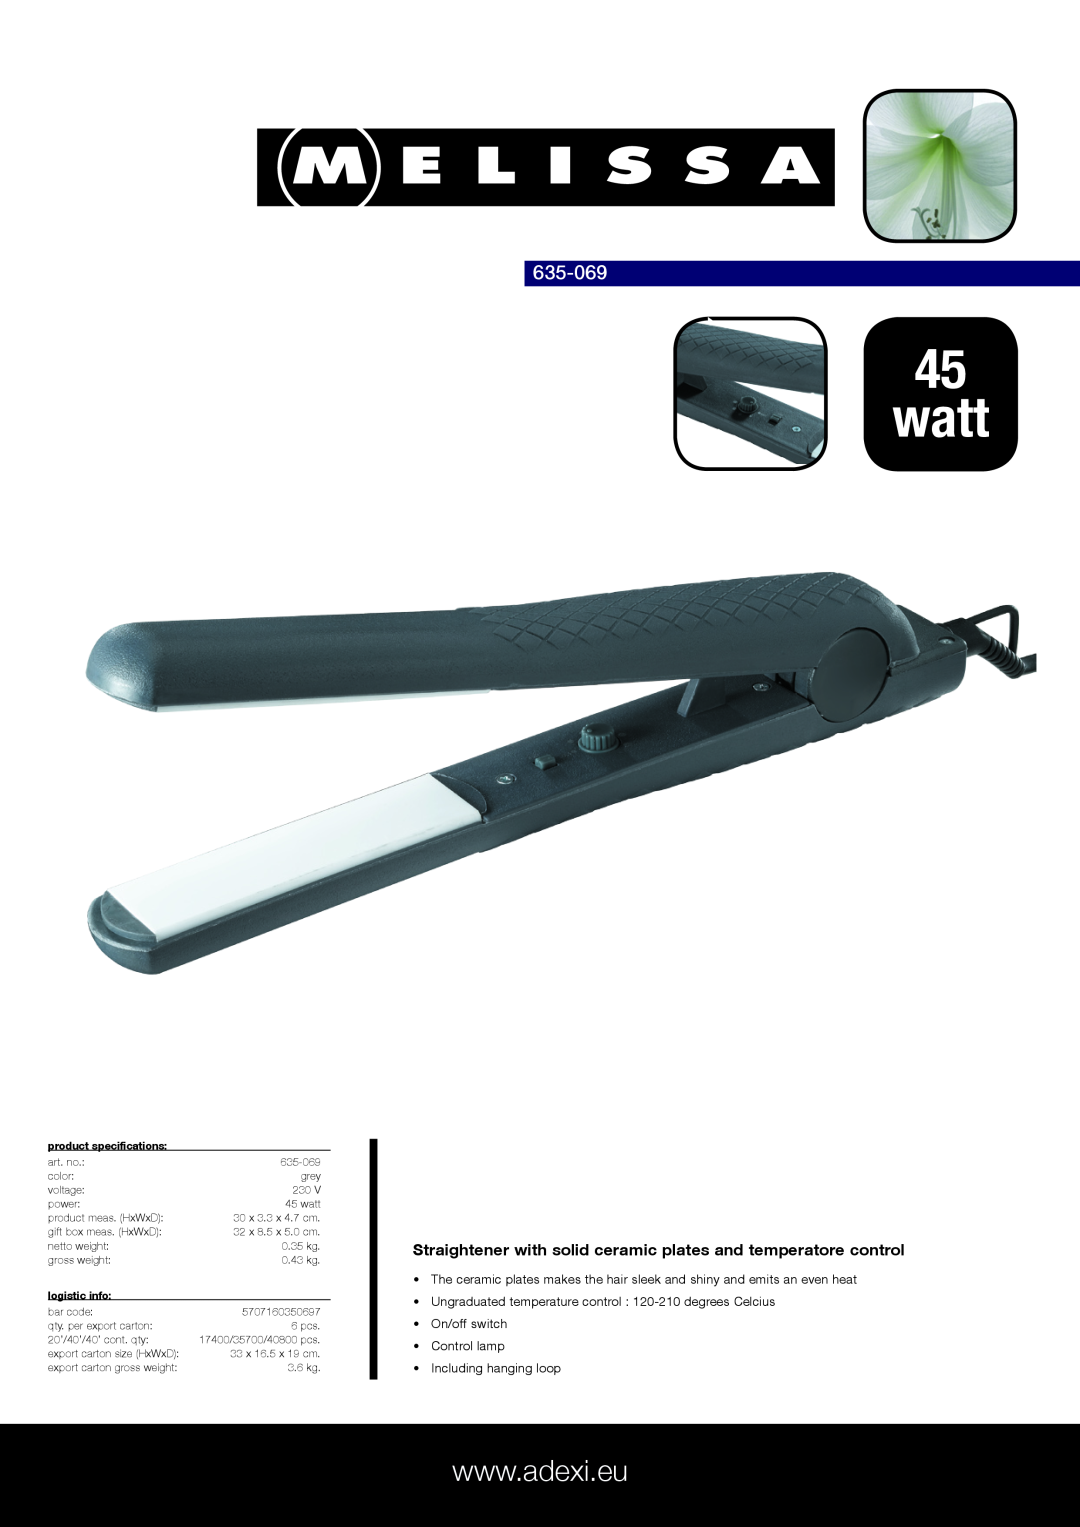 Melissa 635-069 specifications watt, Straightener with solid ceramic plates and temperatore control, logistic info 